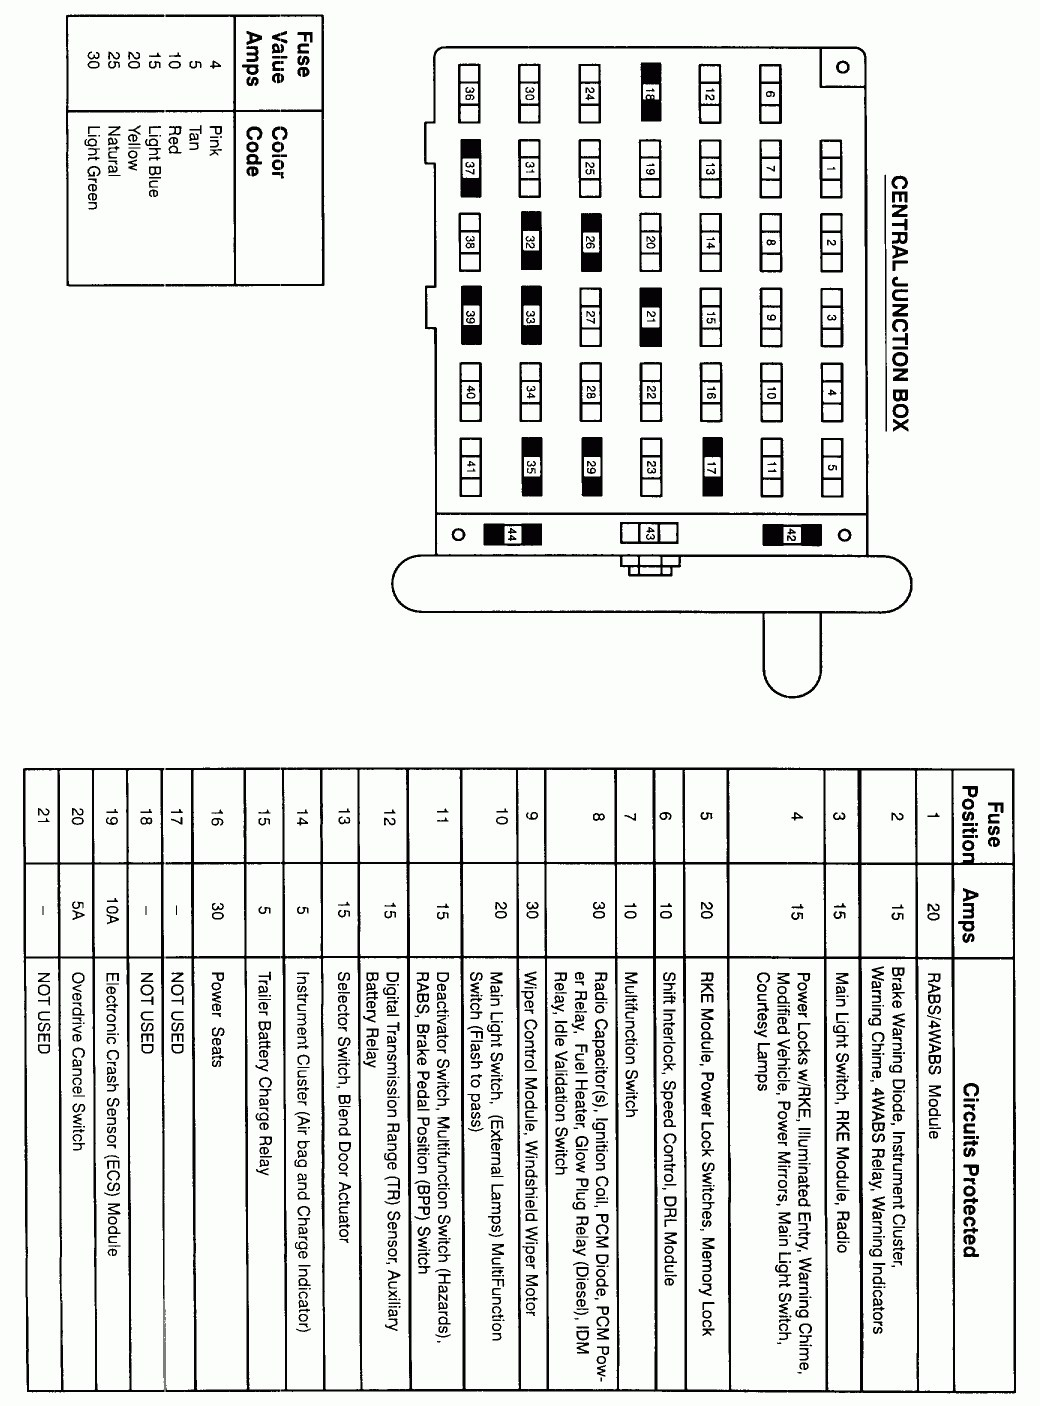 1999 Ford Expedition Fuse Box Diagram Can You Send Me A Diagram For A1999 E350 Fuse Panel Wiring Diagram